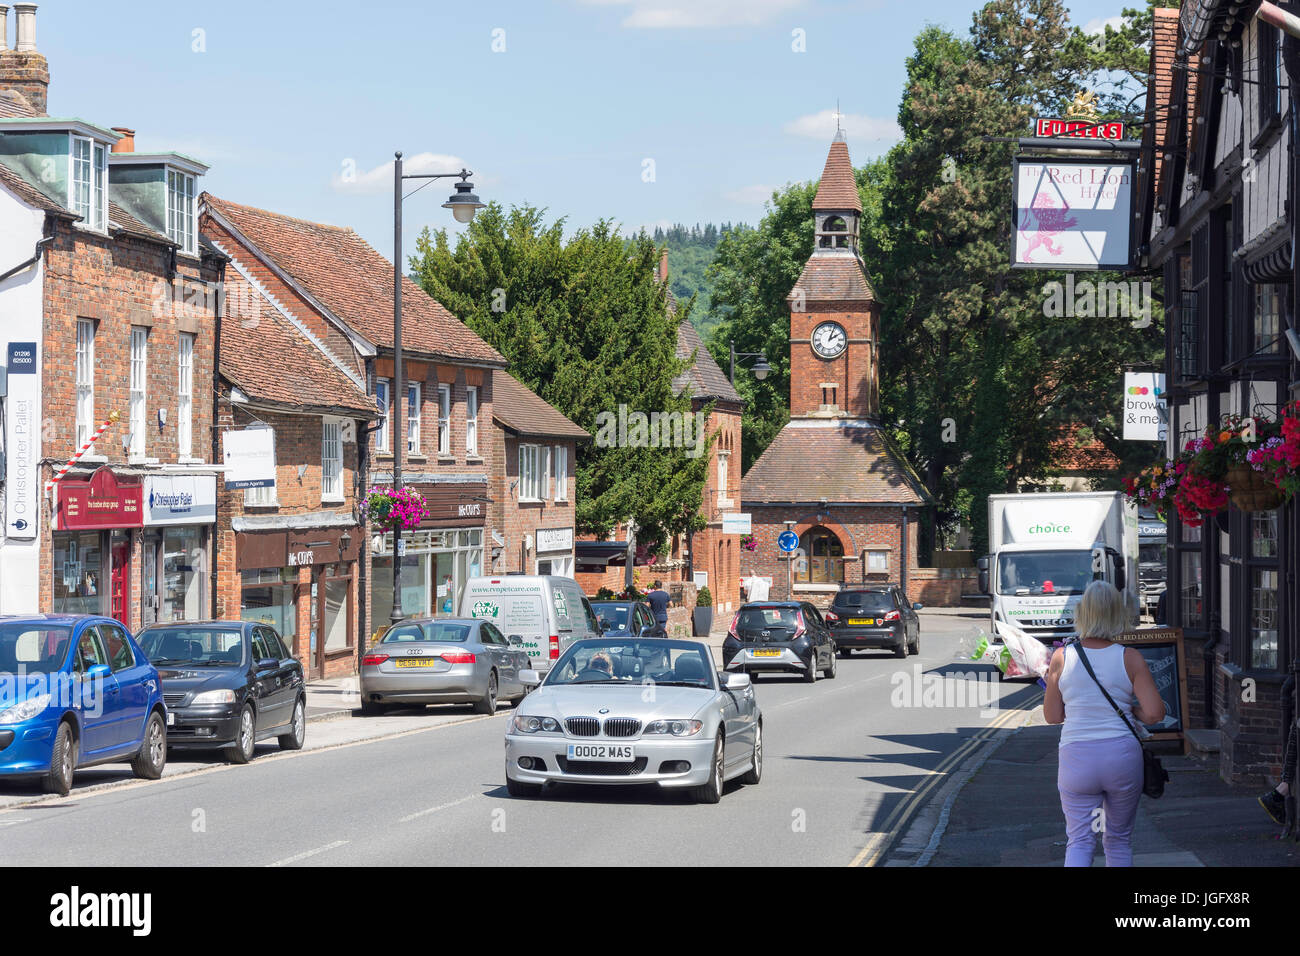 High Street, Wendover, Buckinghamshire, Angleterre, Royaume-Uni Banque D'Images